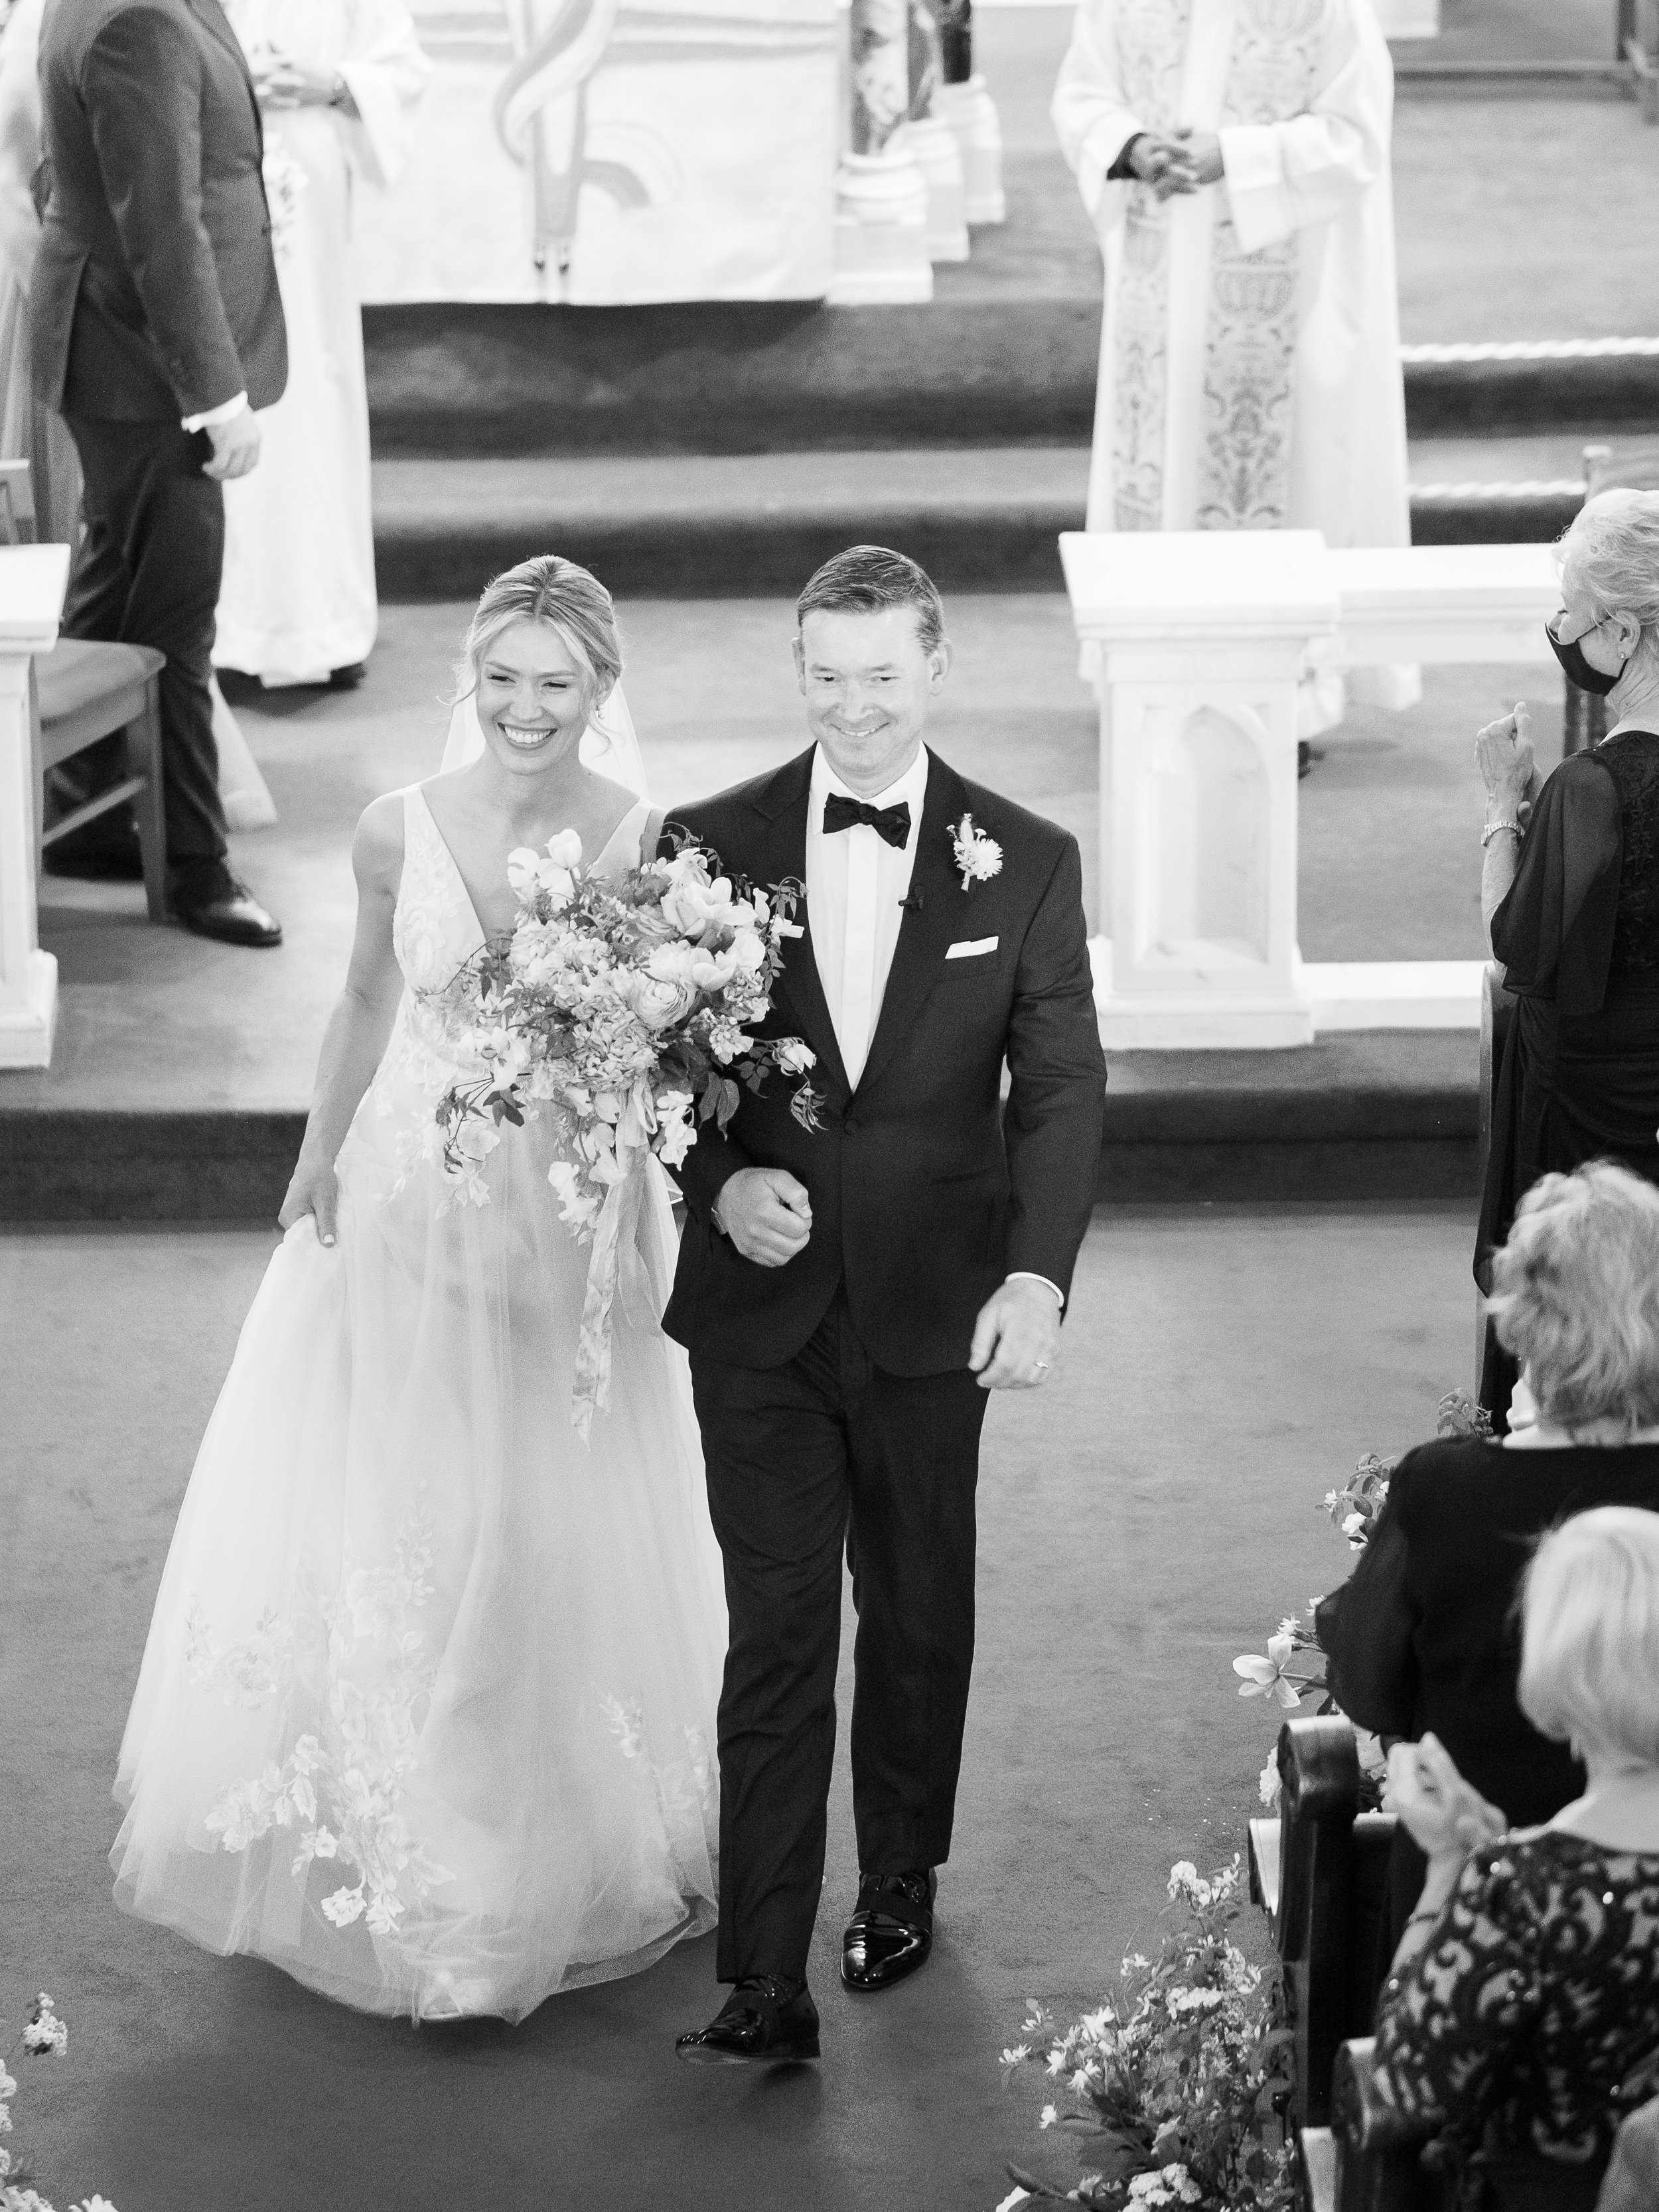 Wedding Ceremony at St. Andrews Church in Sag Harbor